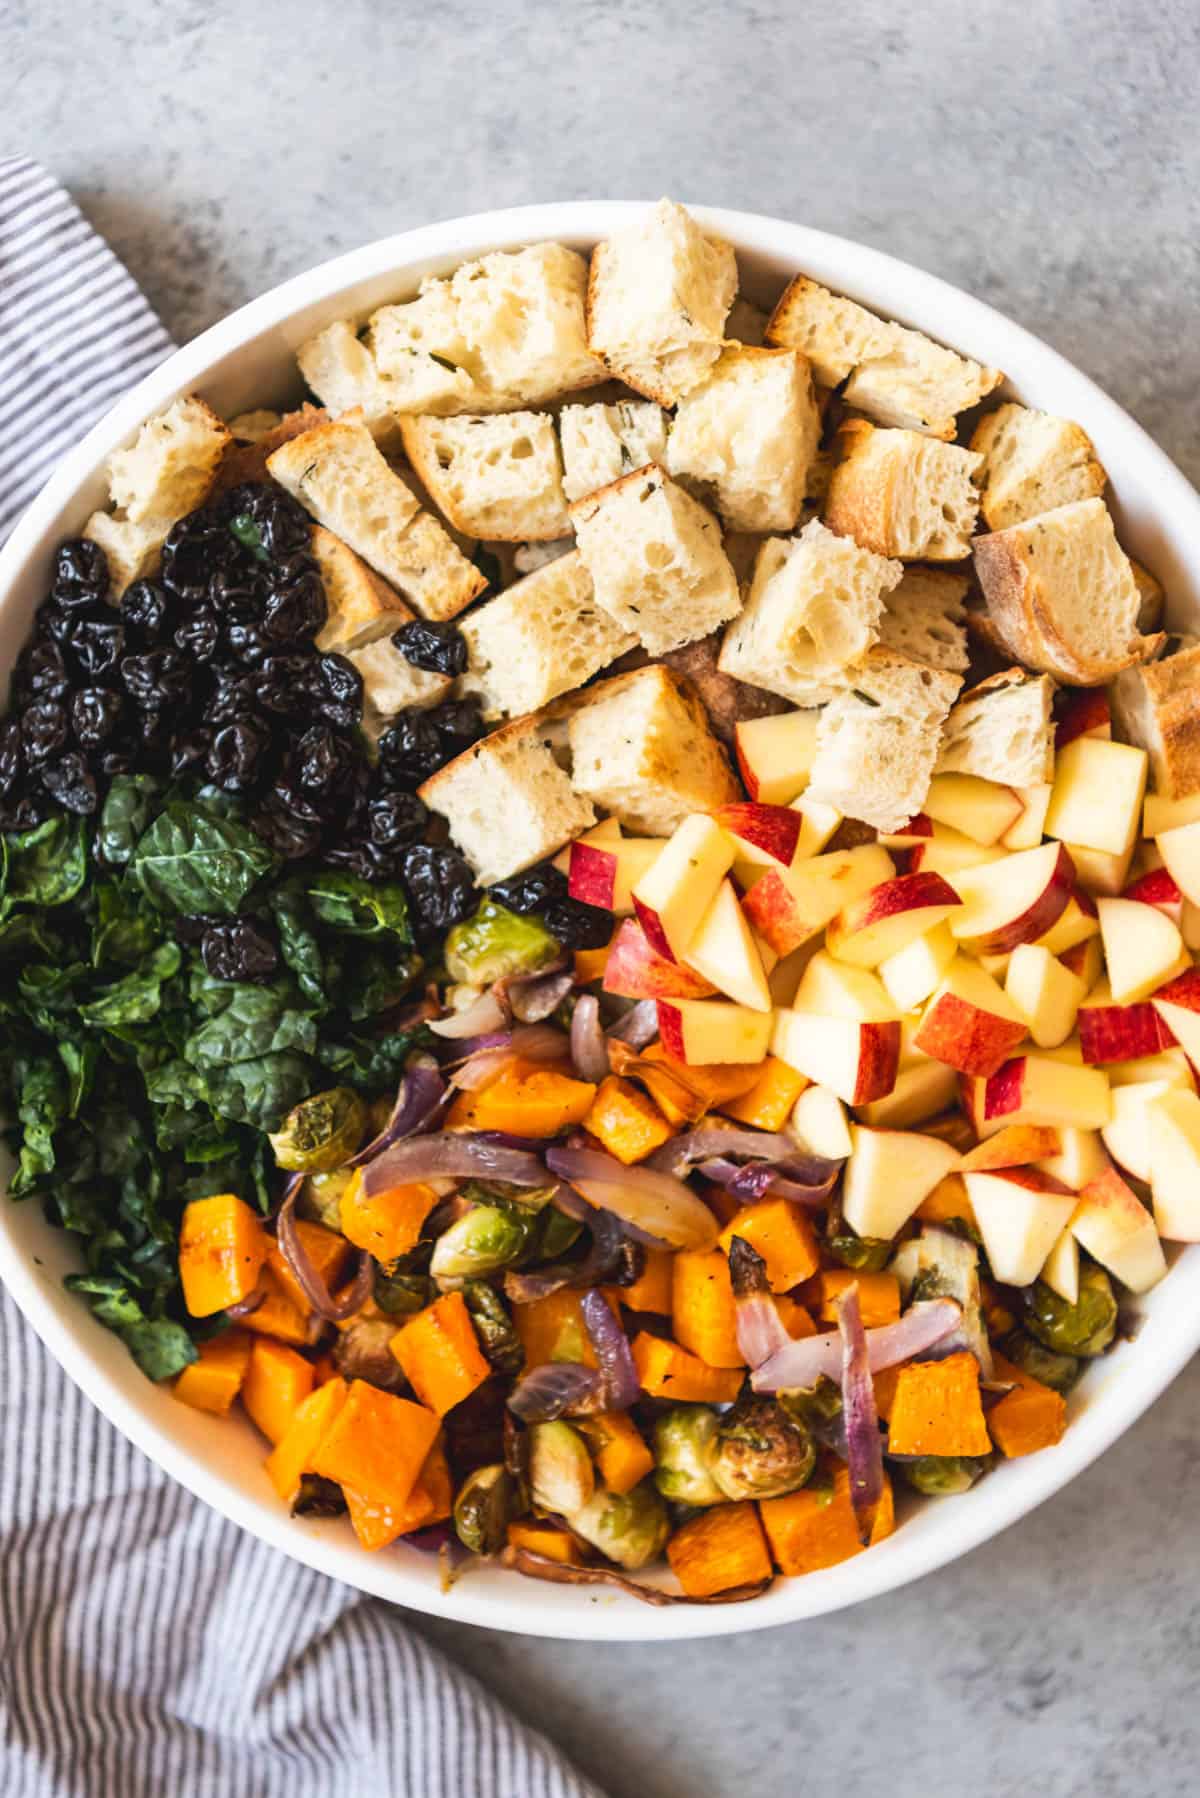 An image of a large bowl full of the ingredients for making a Fall Panzanella Salad, including kale, apples, roasted vegetables, and of course, plenty of cubed, toasted bread.